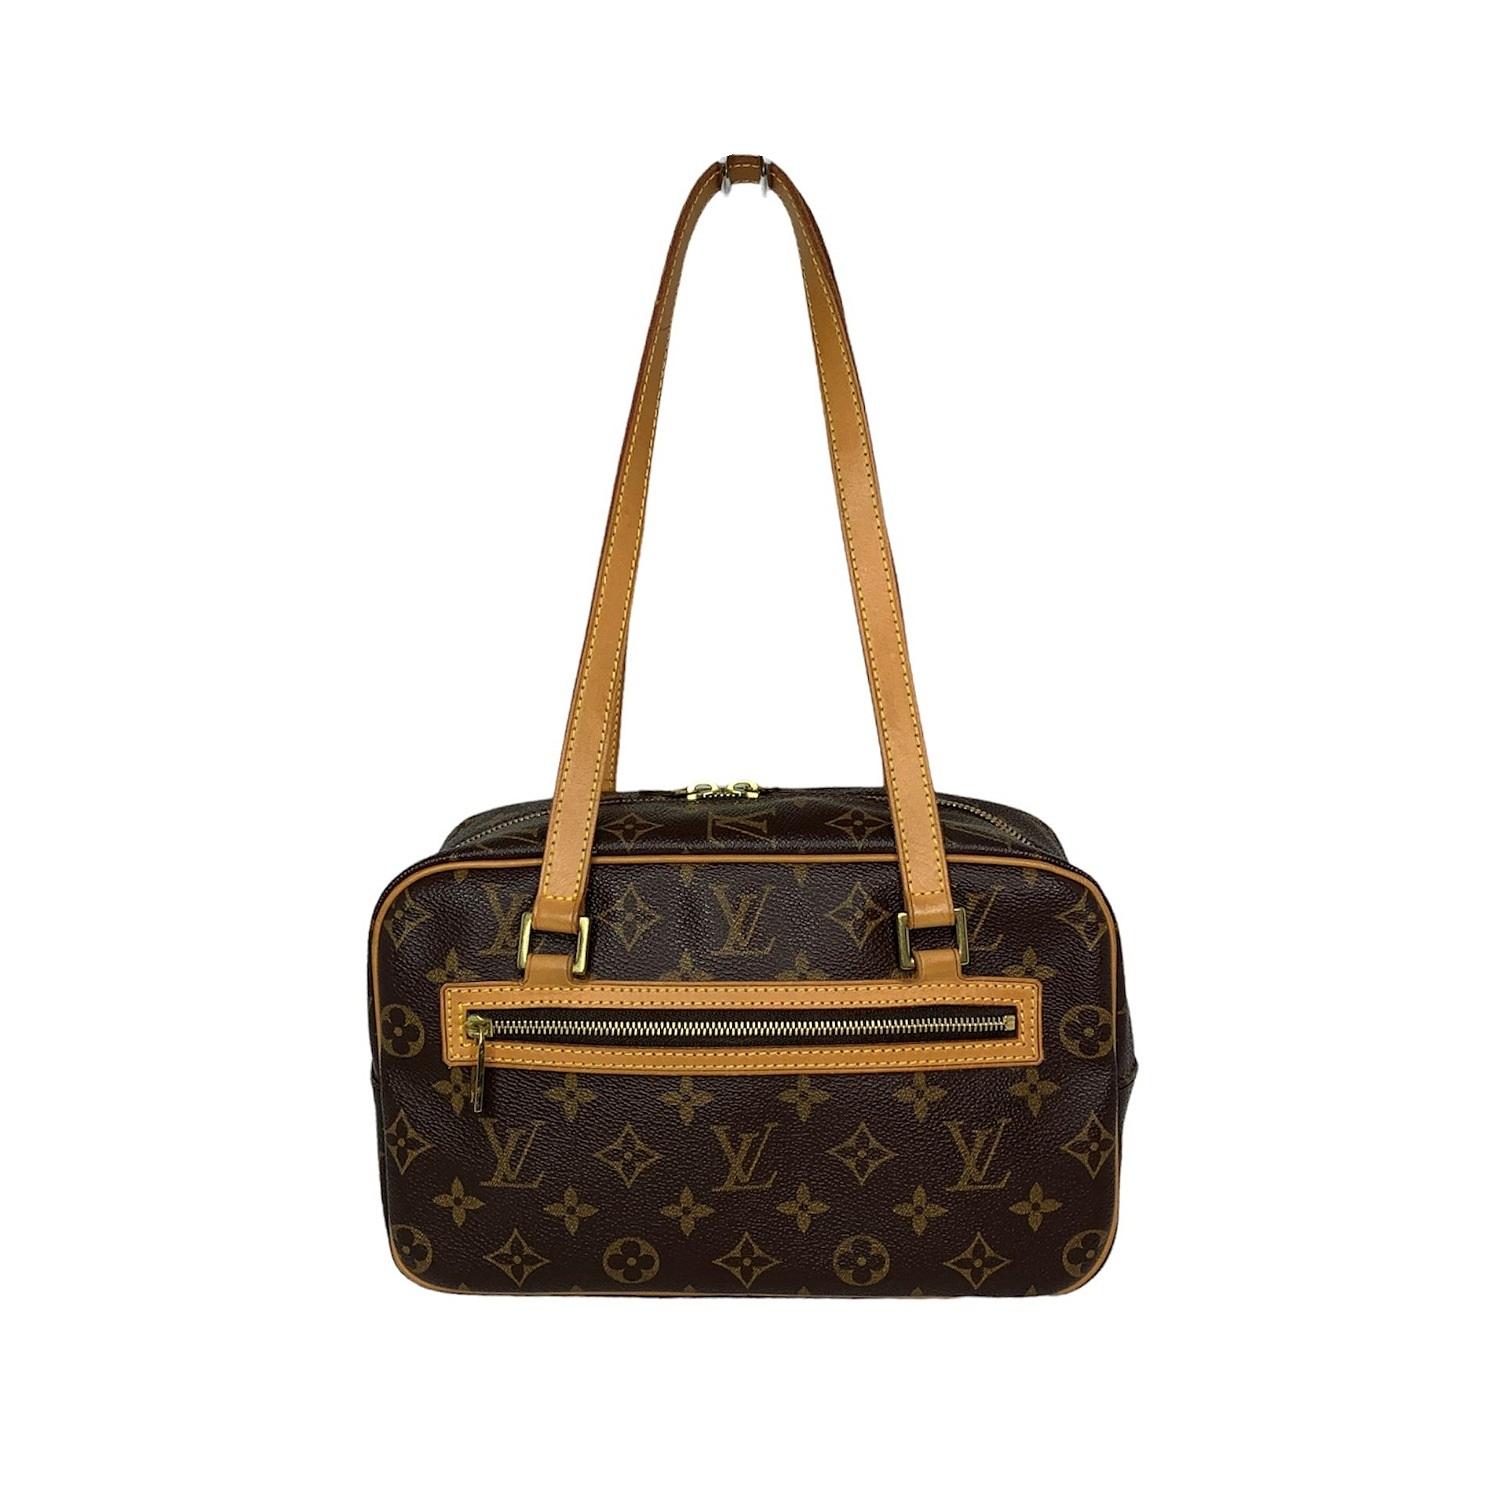 The Louis Vuitton Monogram Canvas Cite MM Bag is perfect for everyday wear and big enough to hold all your daily essentials such as cell phone, wallet, make-up and more. This is the medium-sized member of the modern structured Cite family. Est.